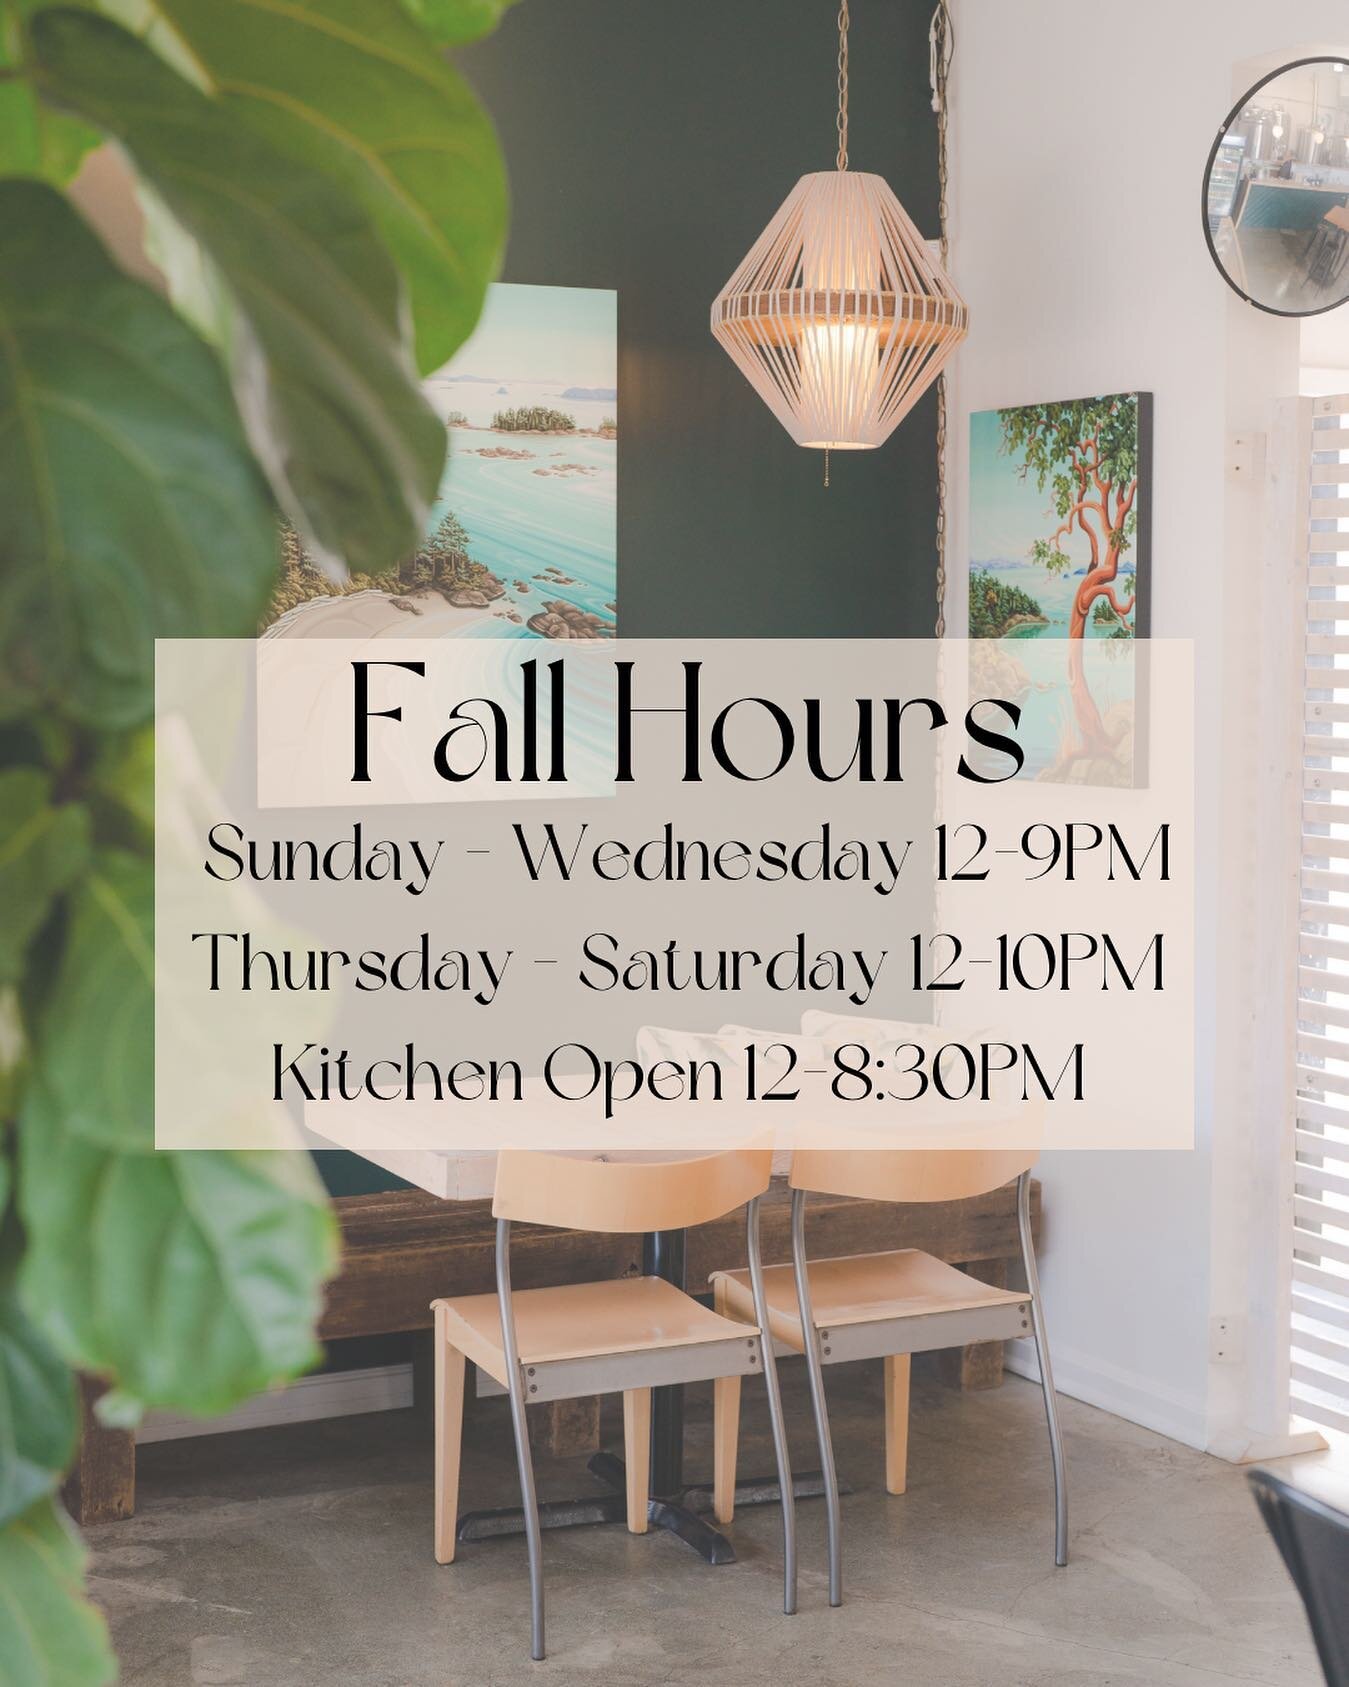 Today marks the start of our fall operating hours! Open 7 days a week - Sunday - Wednesday 12-9pm &amp; Thursday - Saturday 12-10pm. Our kitchen is open everyday from 12-8:30pm. 

We look forward to seeing you soon! 🍻